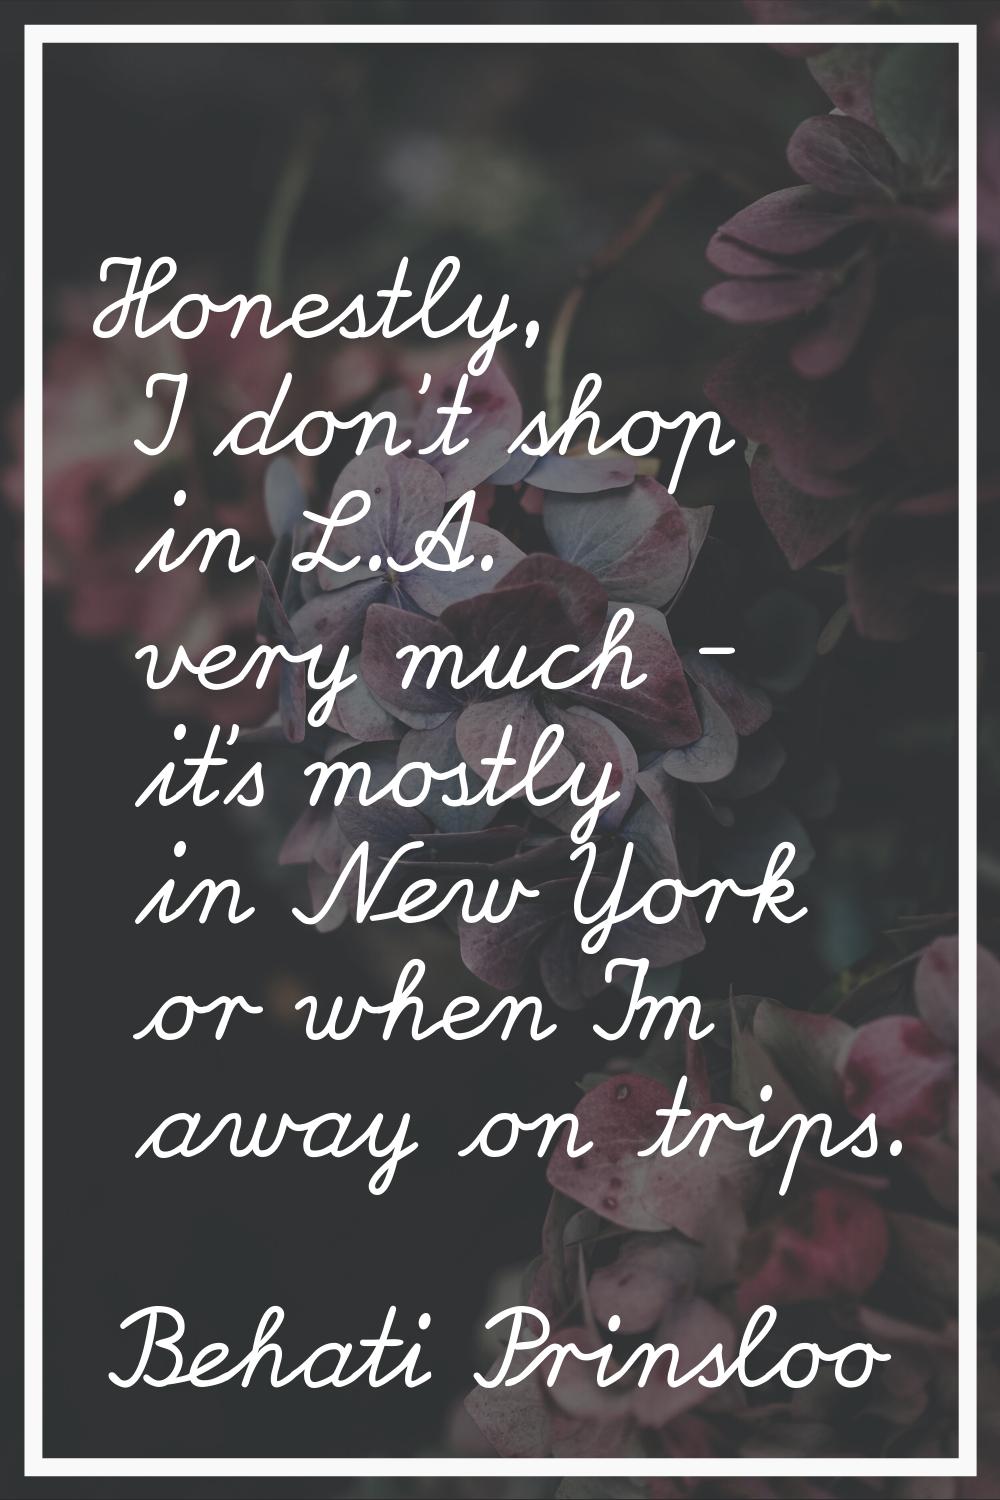 Honestly, I don't shop in L.A. very much - it's mostly in New York or when I'm away on trips.